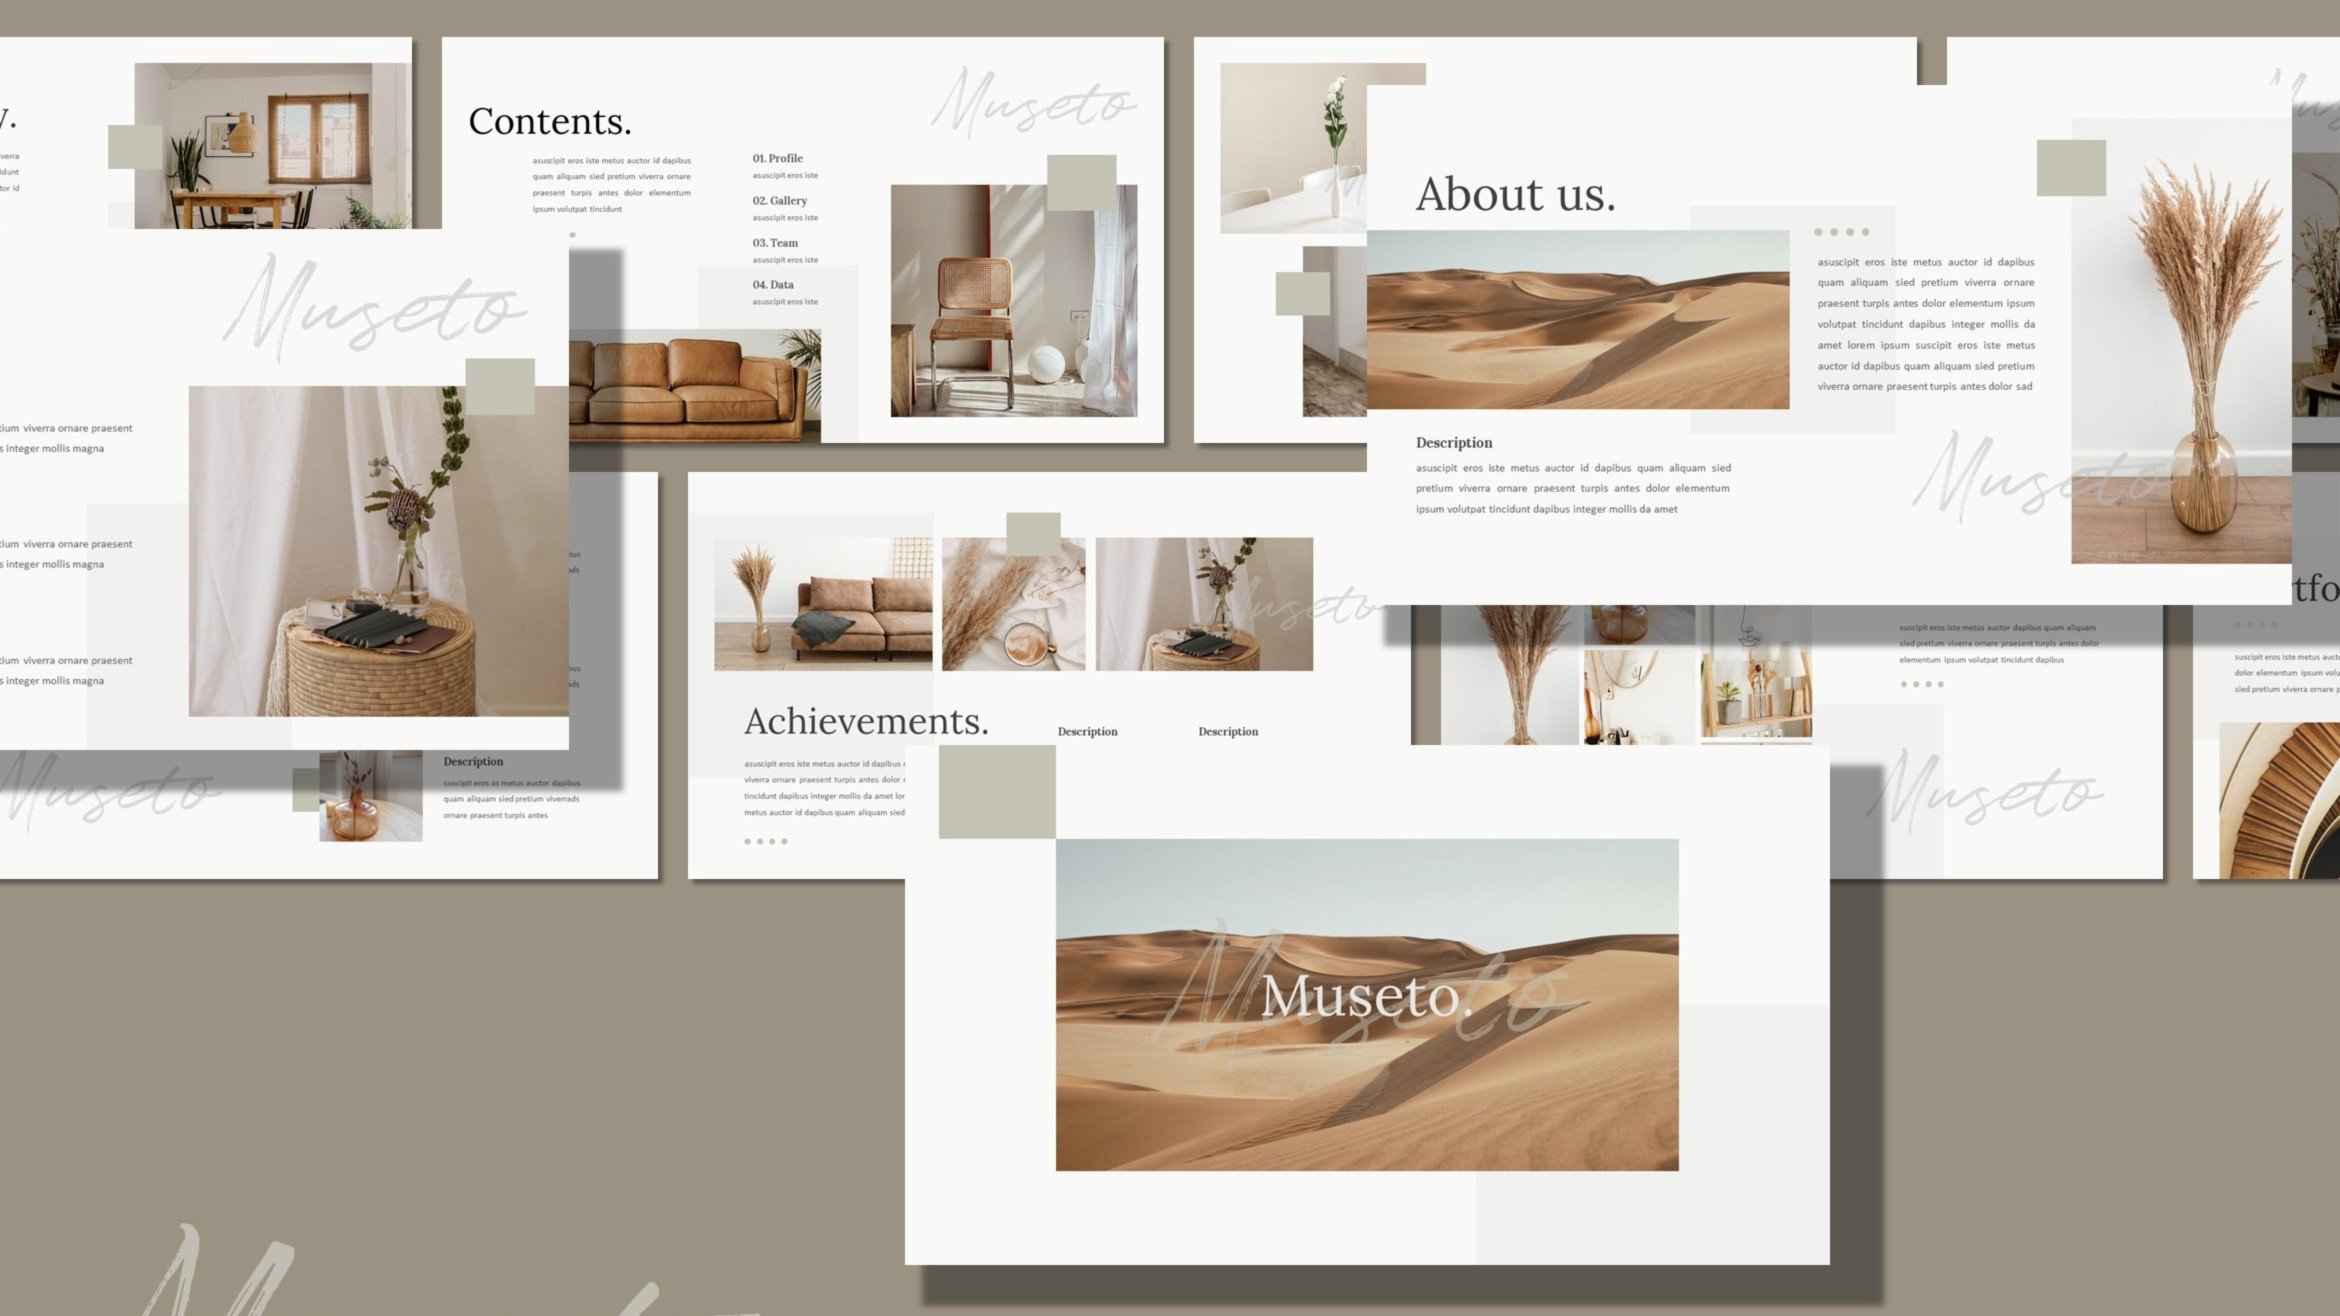 Musetto - Aesthetic PowerPoint Presentation Template Free Download (8 Slides)